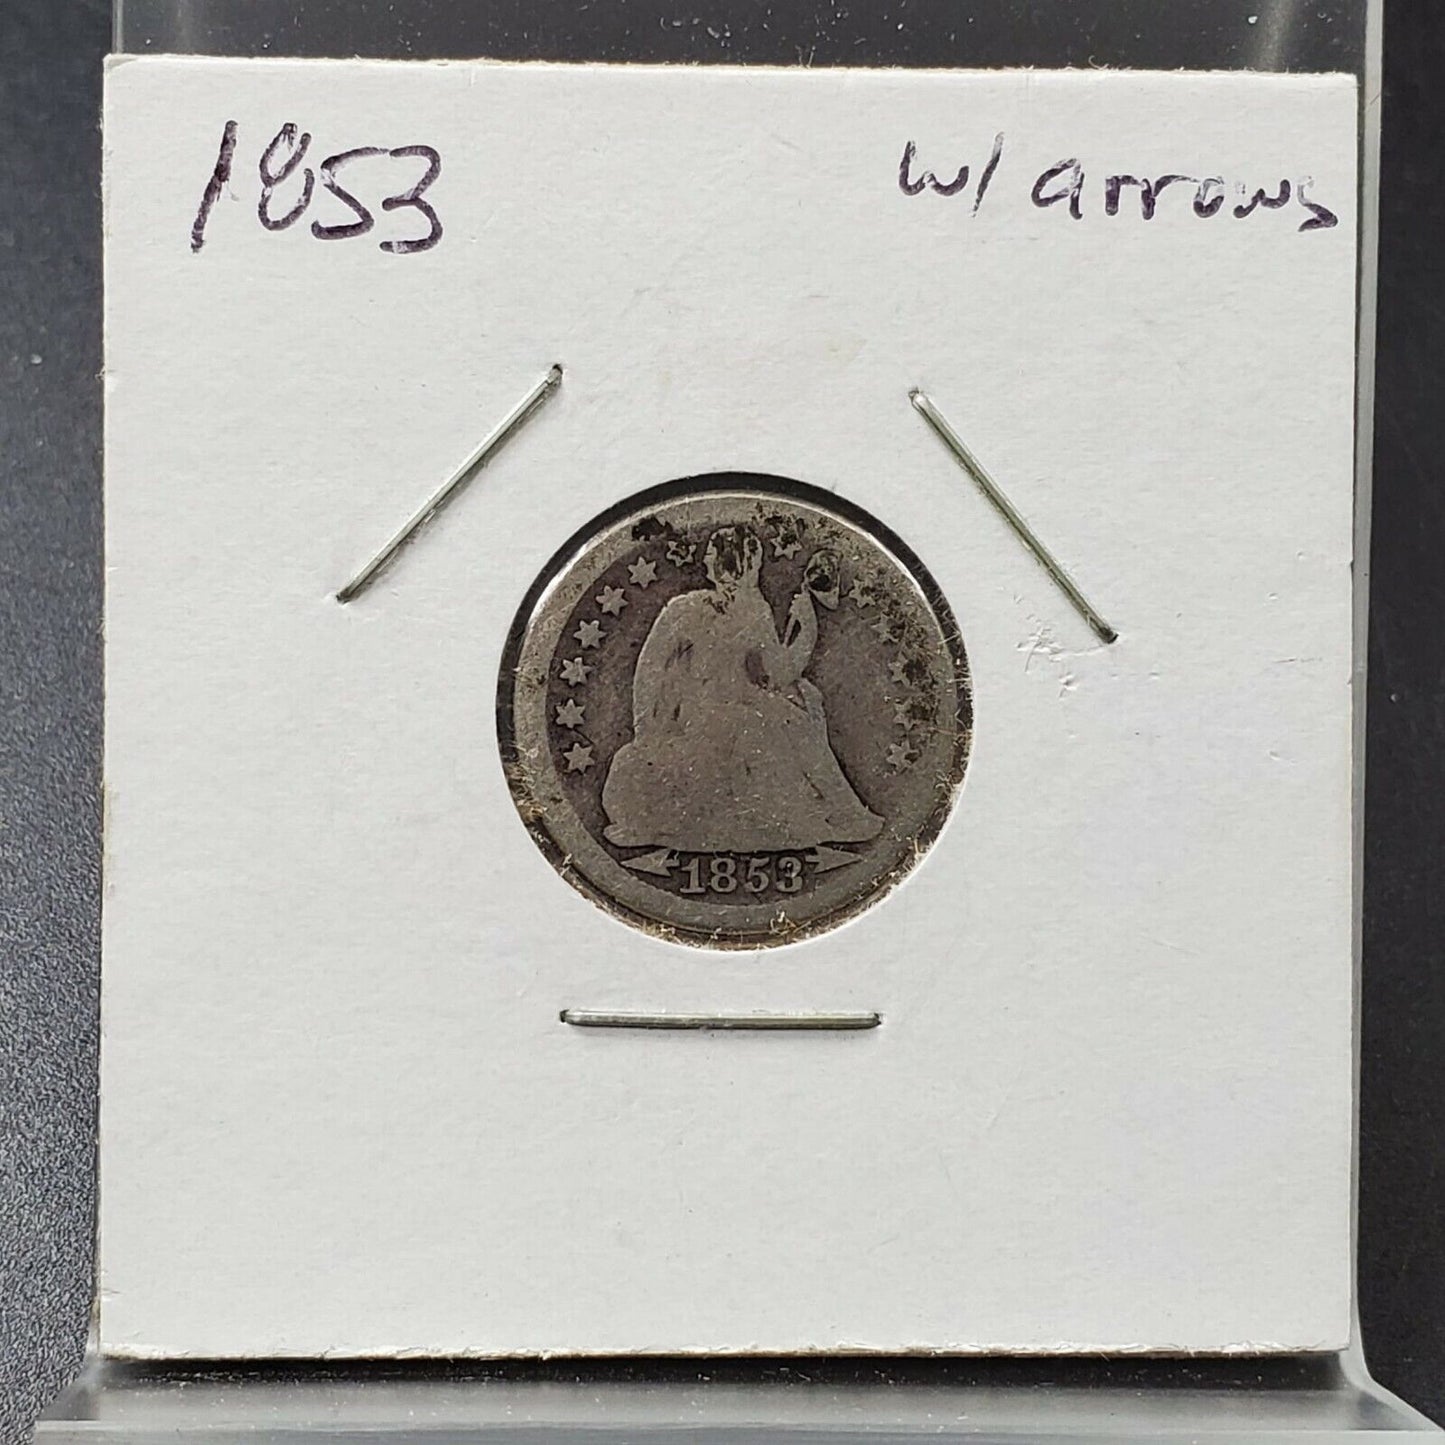 1853 P SEATED LIBERTY With Arrows DIME COIN CHOICE AG About Good FULL DATE